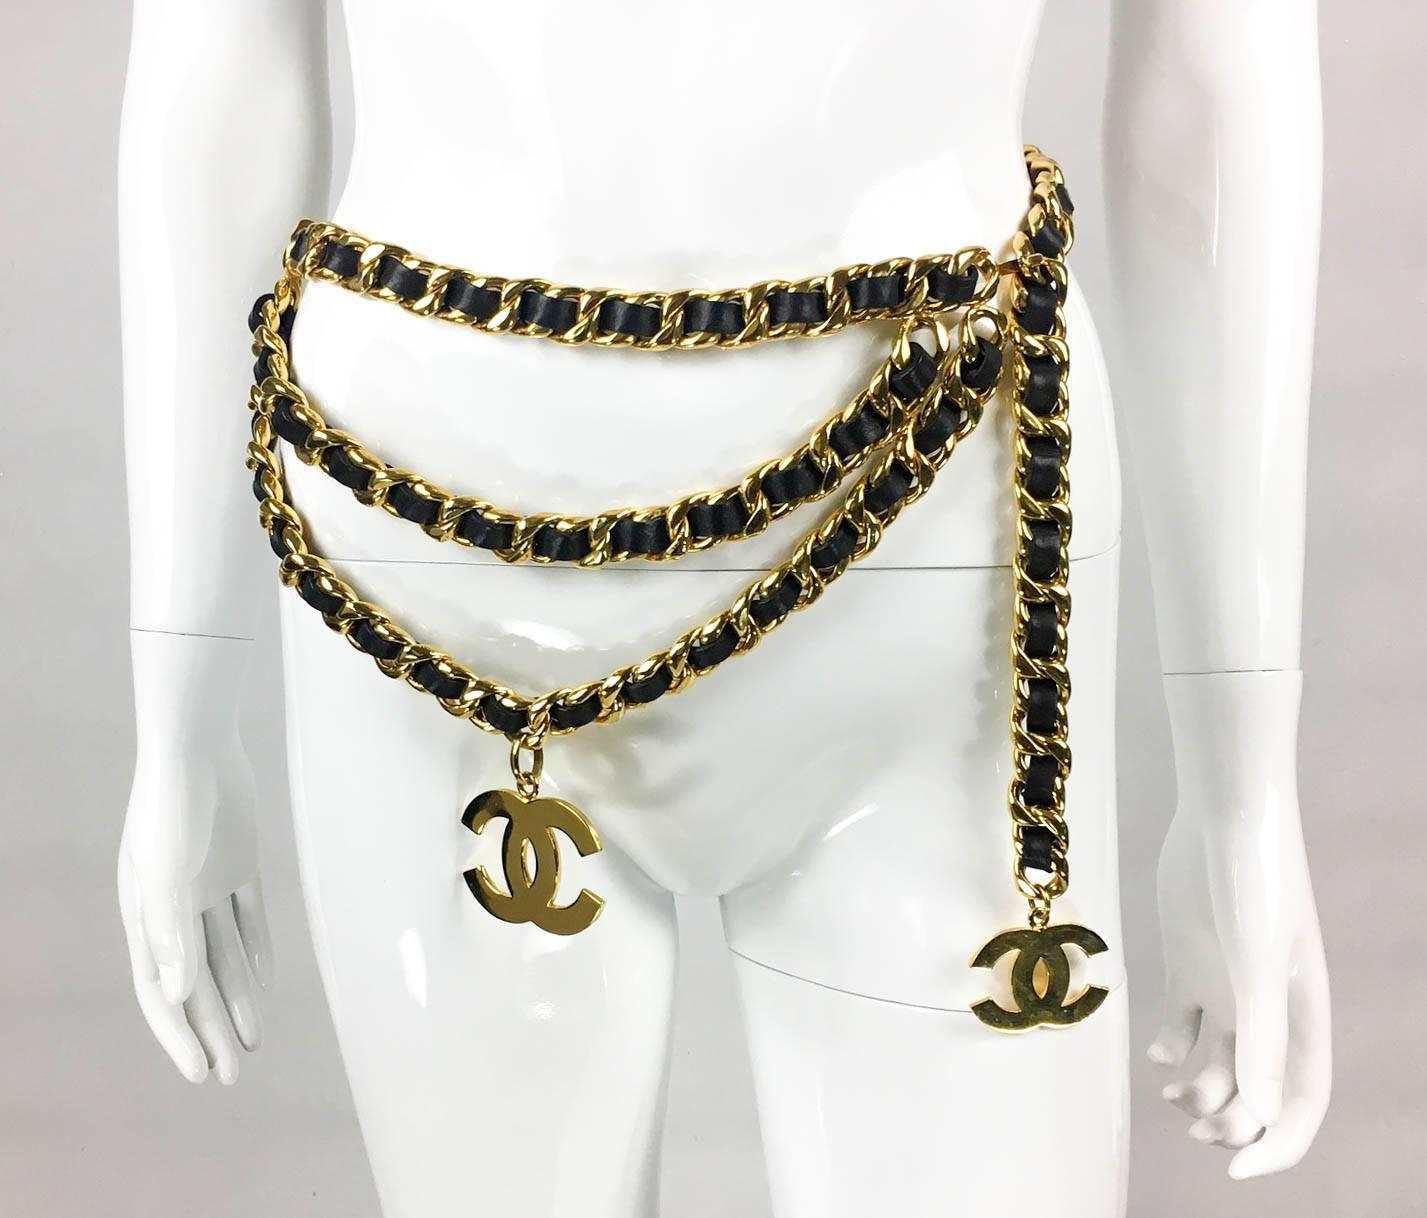 Chanel Vintage Runway Belt. This fabulous belt by Chanel made in gold-tone hardware and black leather dates back from 1992. The chunky chain is interwoven with black leather and features 2 iconic ‘CC’ Chanel logos. One chain goes around the waist,